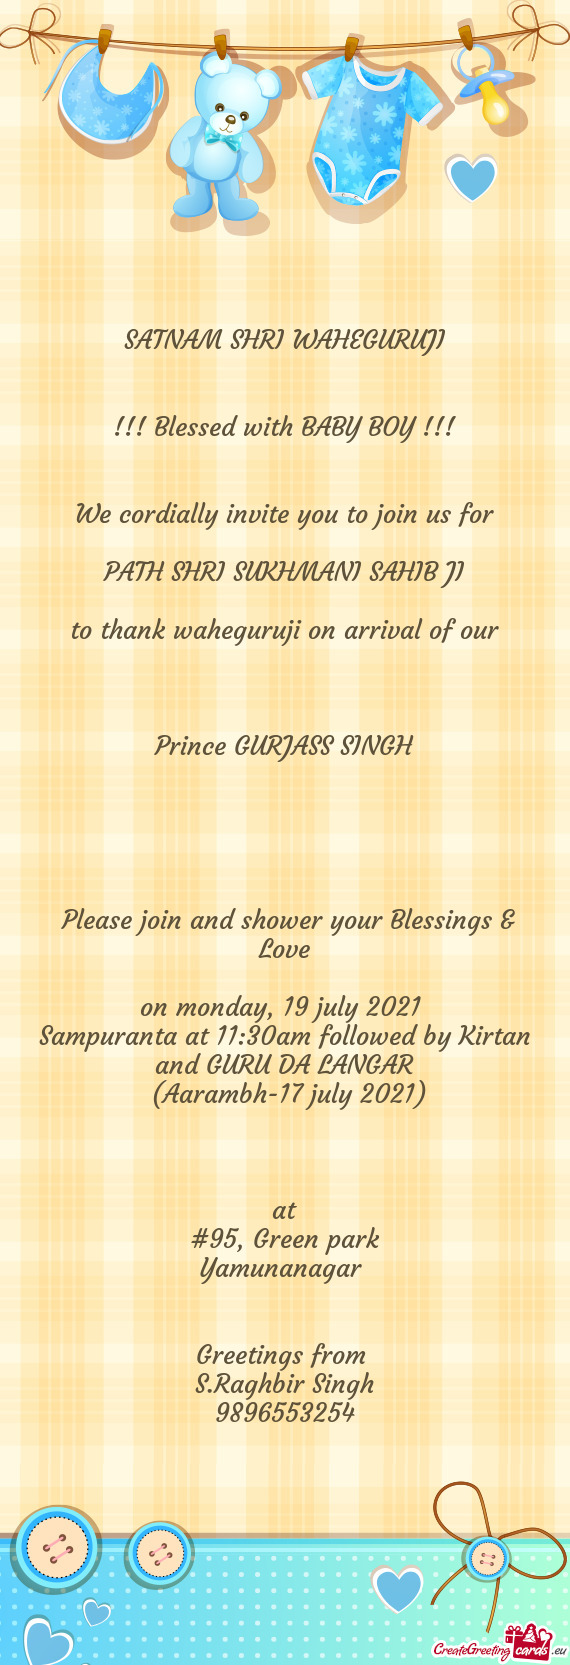 To thank waheguruji on arrival of our